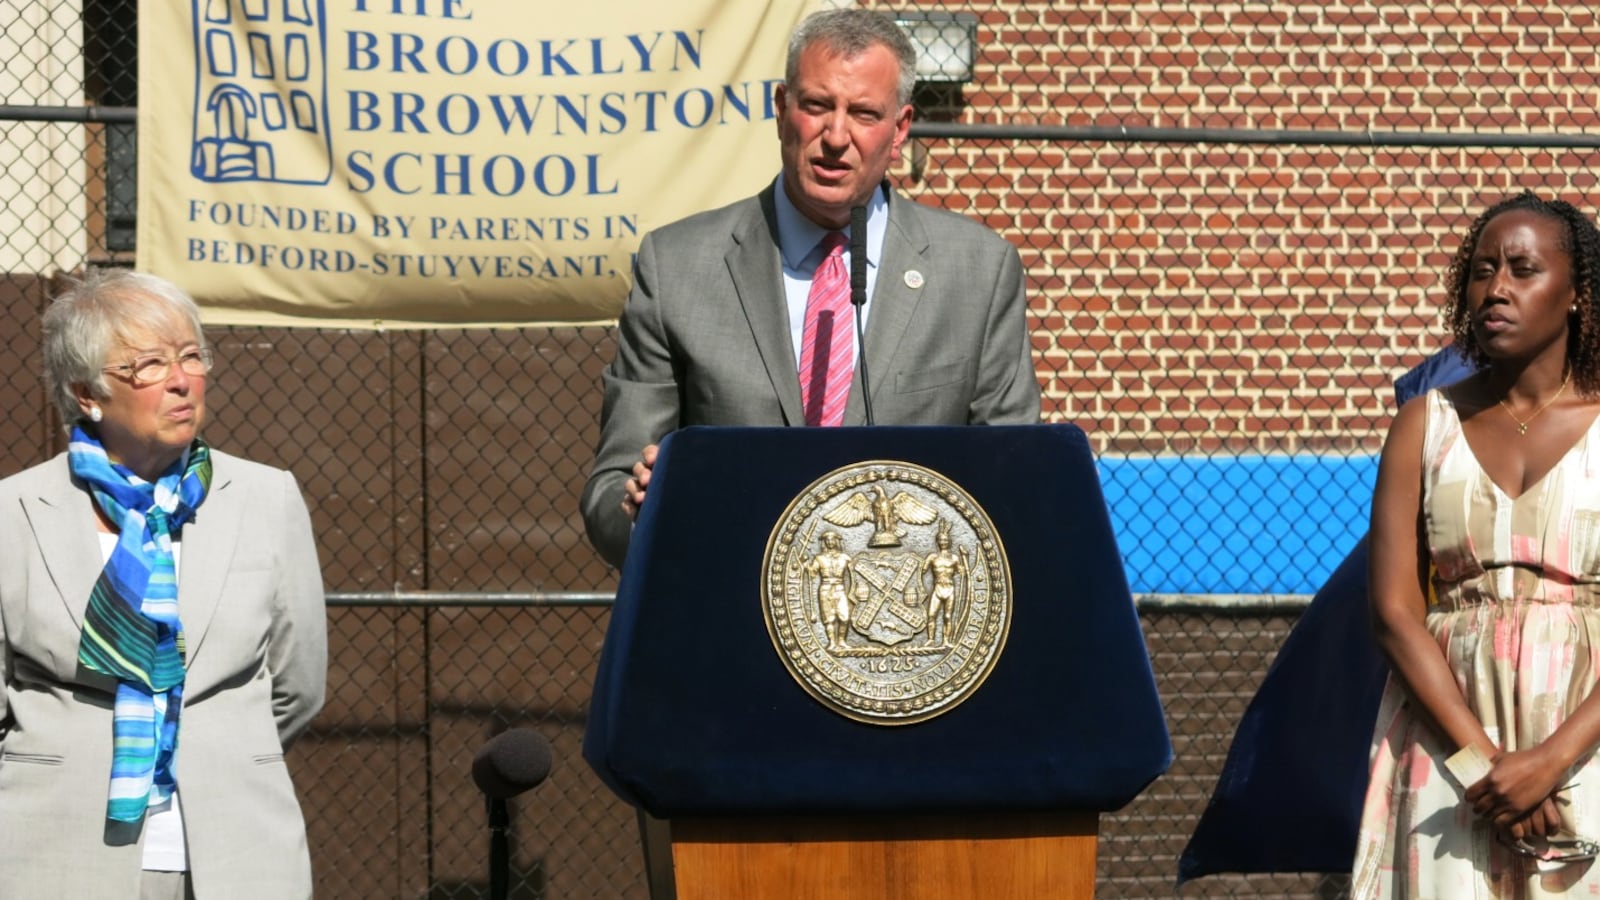 Mayor Bill de Blasio in August 2014 announcing last year's state test results.